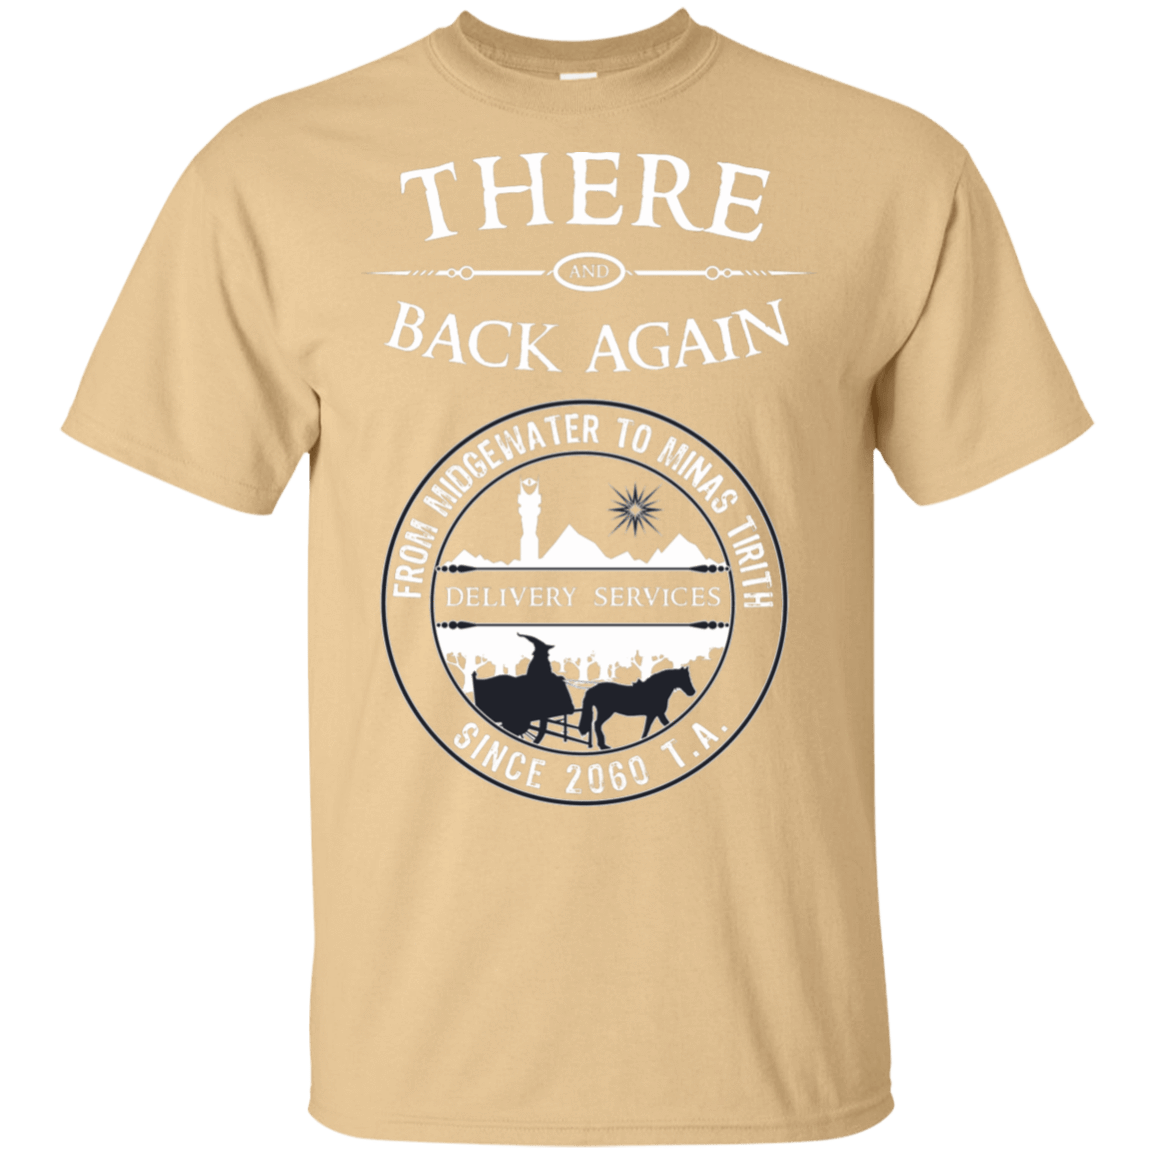 T-Shirts Vegas Gold / S There and Back Again T-Shirt